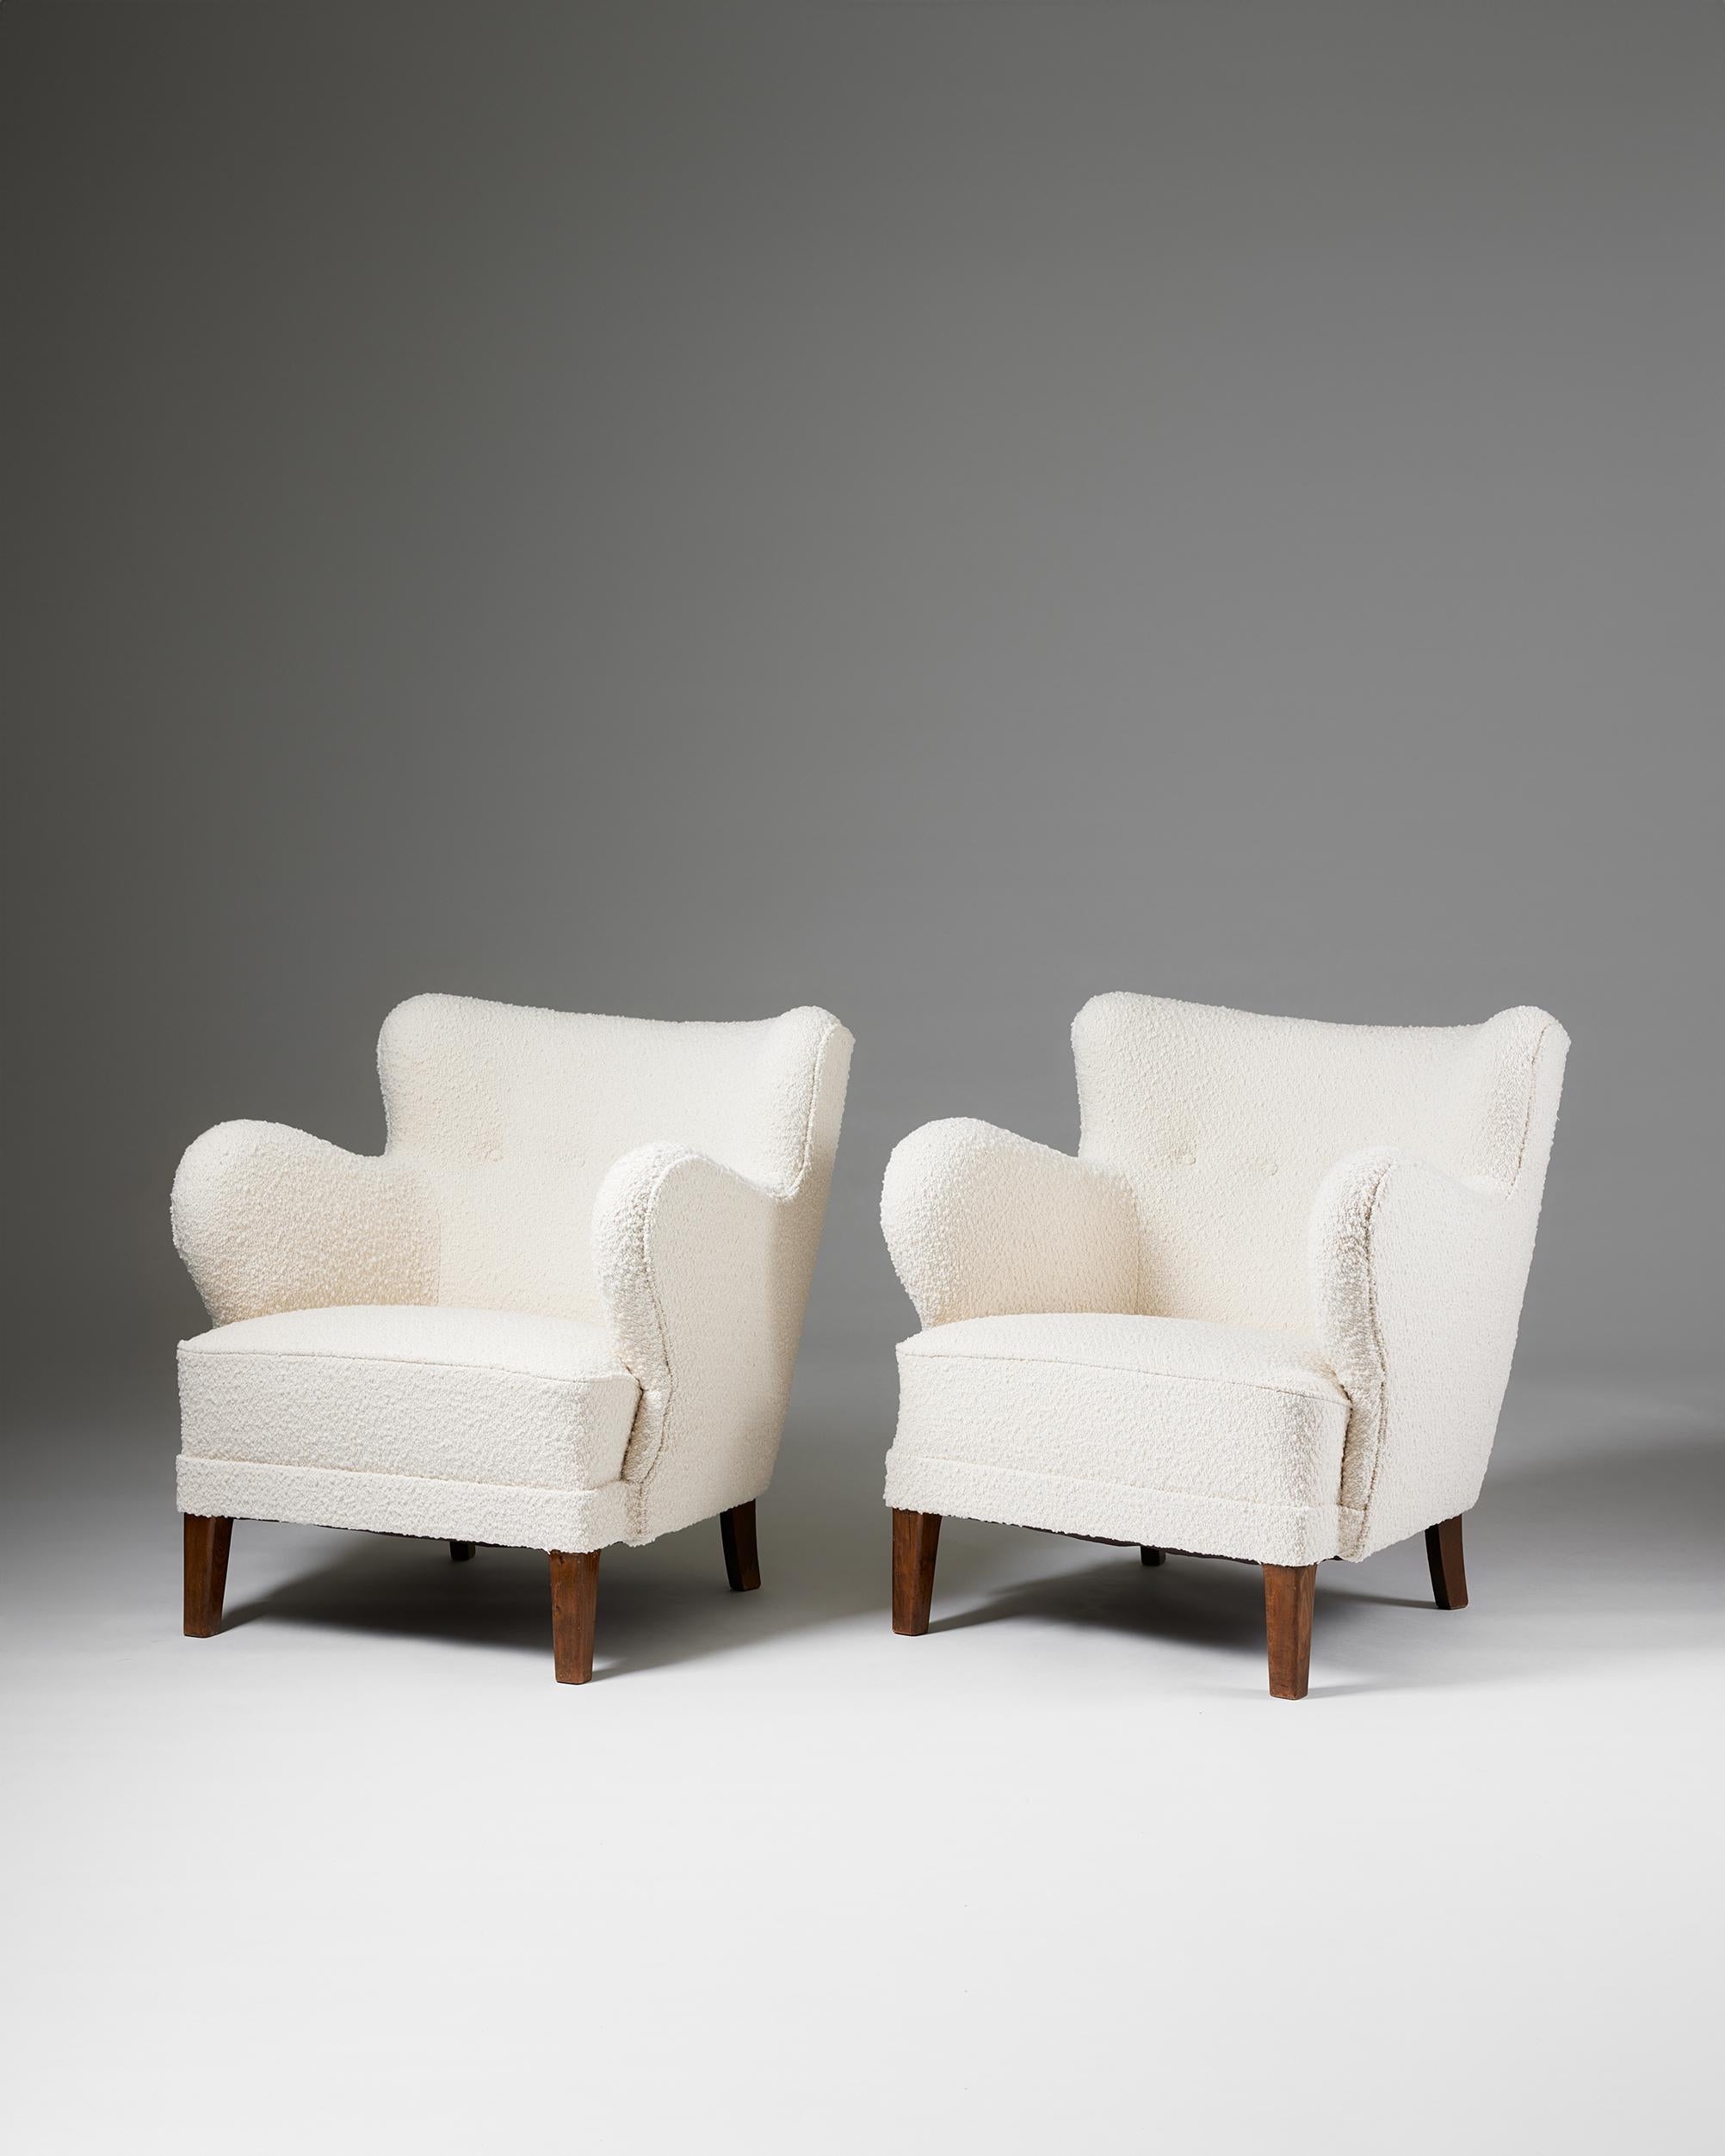 A pair of easy chairs, anonymous,
Denmark, 1940s.

Stained beech and upholstery.

H: 79 cm
W: 71 cm
D: 72 cm
SH: 41 cm
AH: 66 cm